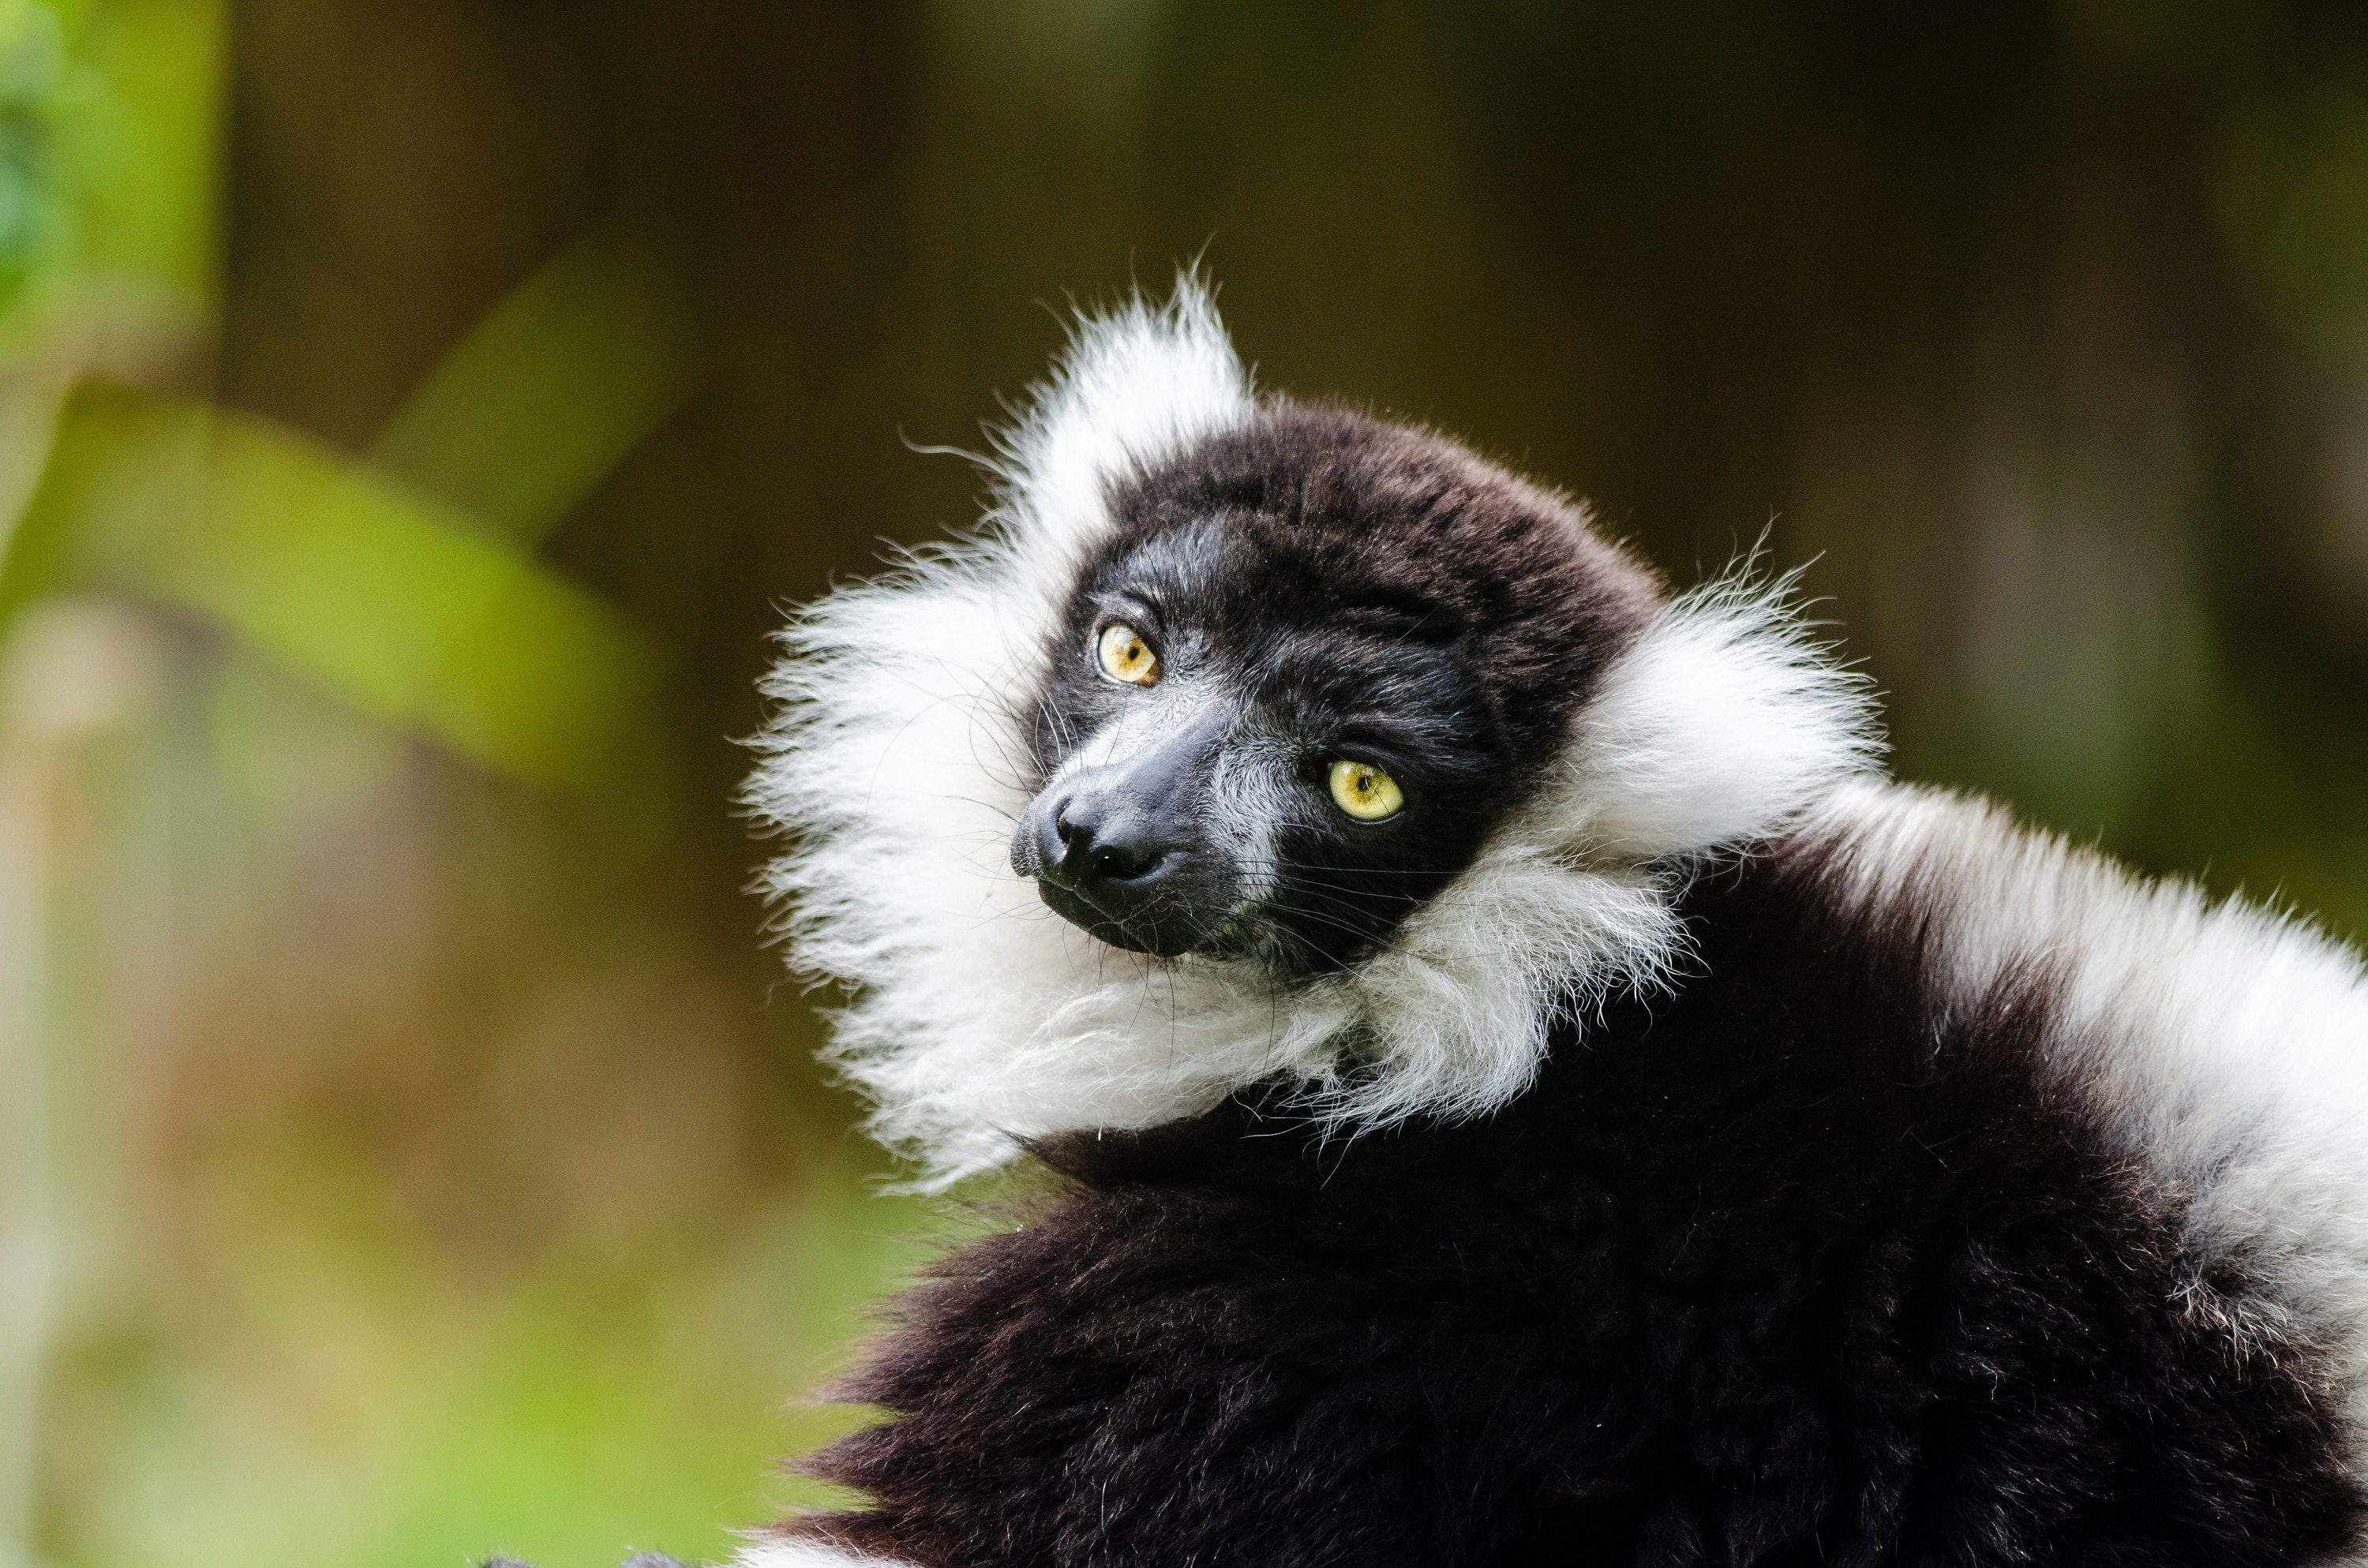 white and black primate at daytime